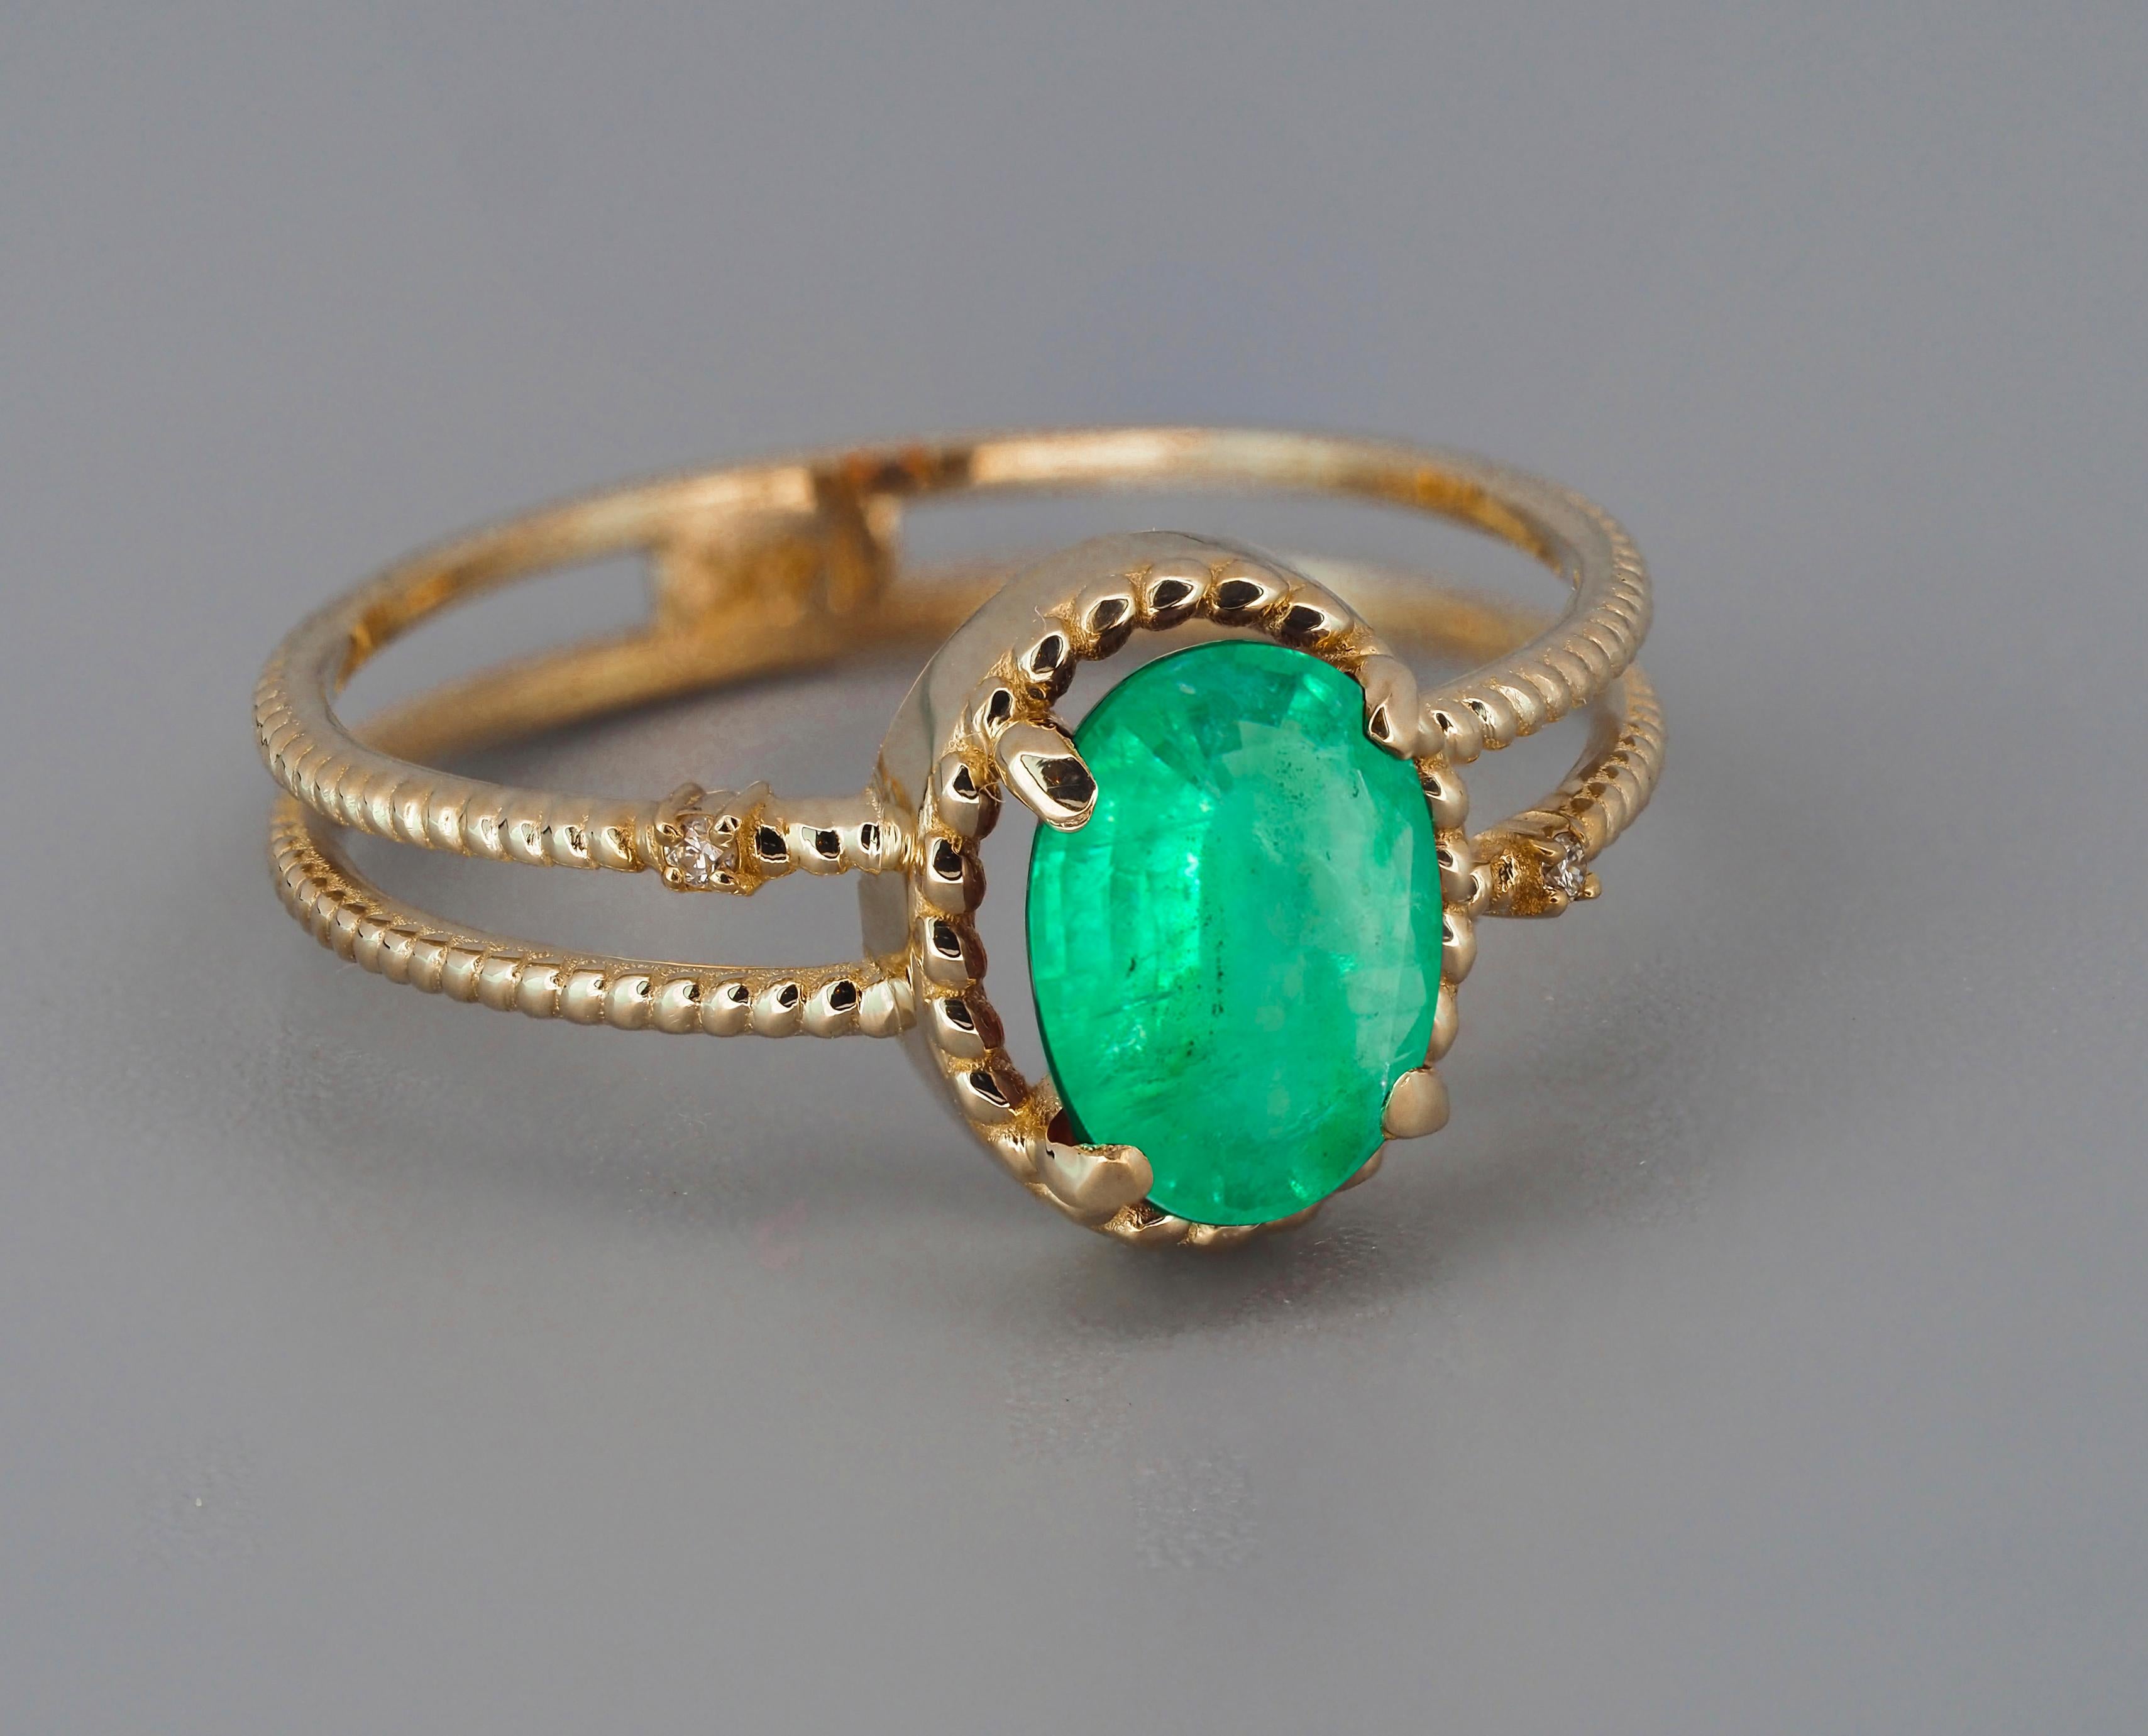 For Sale:  Emerald Gold Ring, Oval Emerald Ring, 14k Gold Ring with Emerald 3